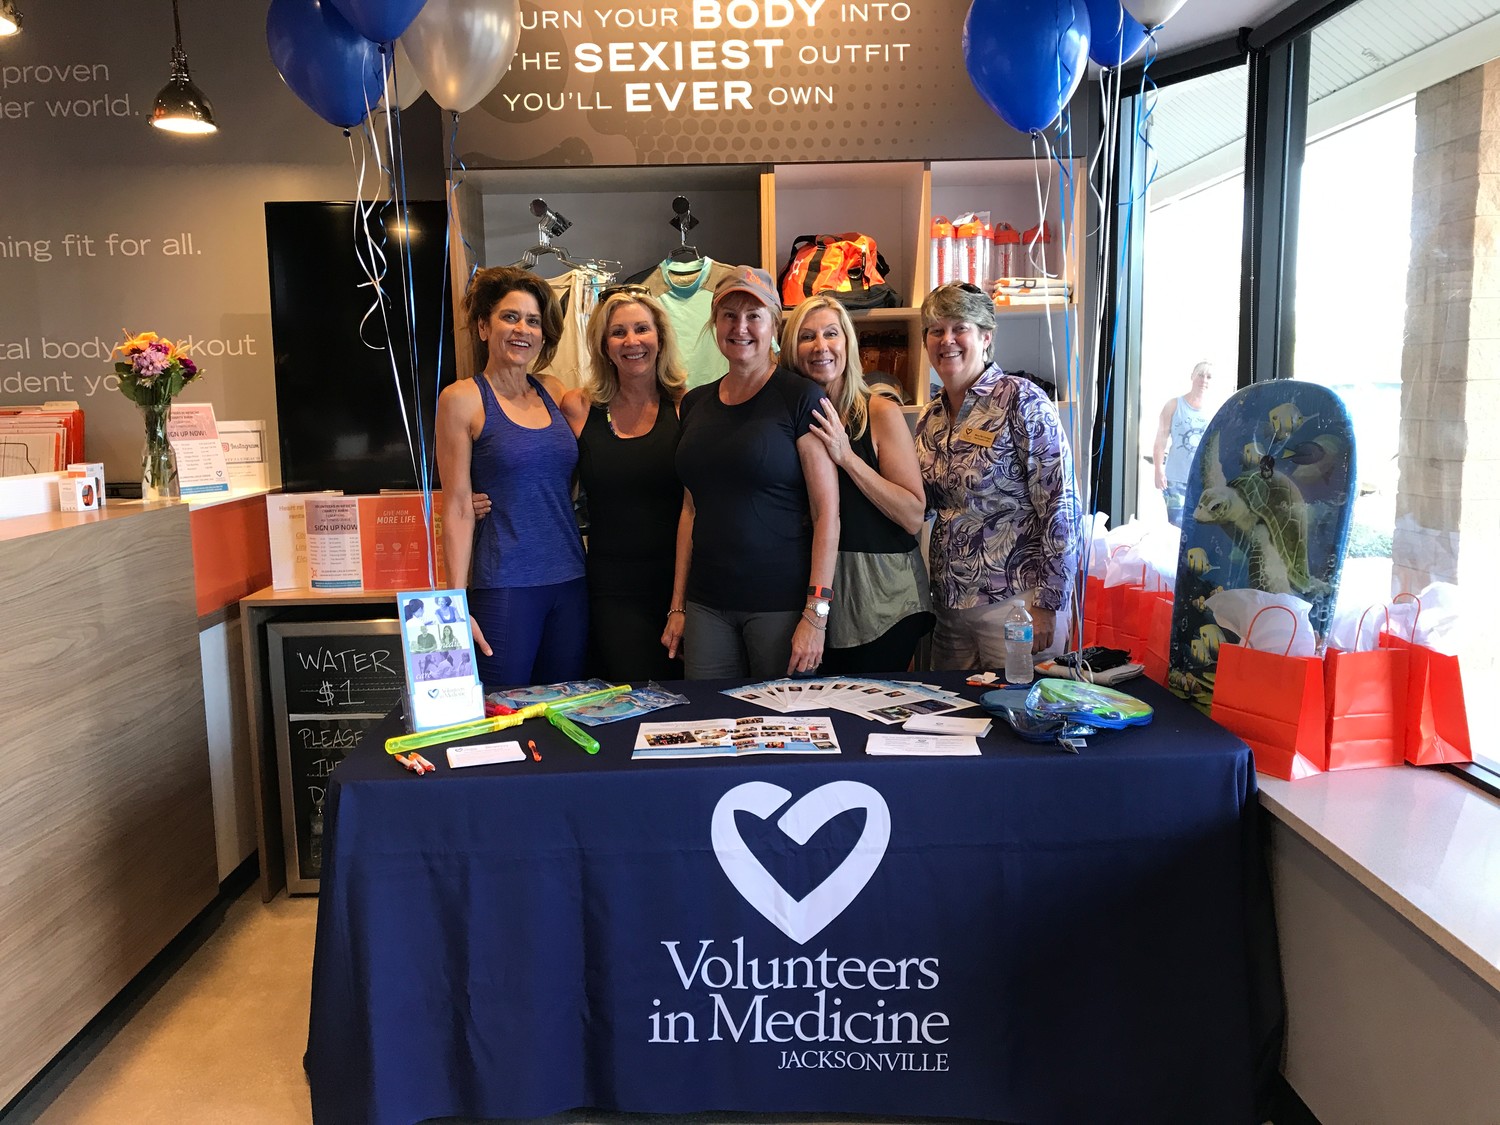 2017 Women With Heart honoree Aimee Boggs (from left); 2018 honorees Shelley Morgan, Leslie Gordon and Dany Atkinson; and Volunteers in Medicine CEO Mary Pat Corrigan attend one of the Orangetheory Fitness Charity Burn events.